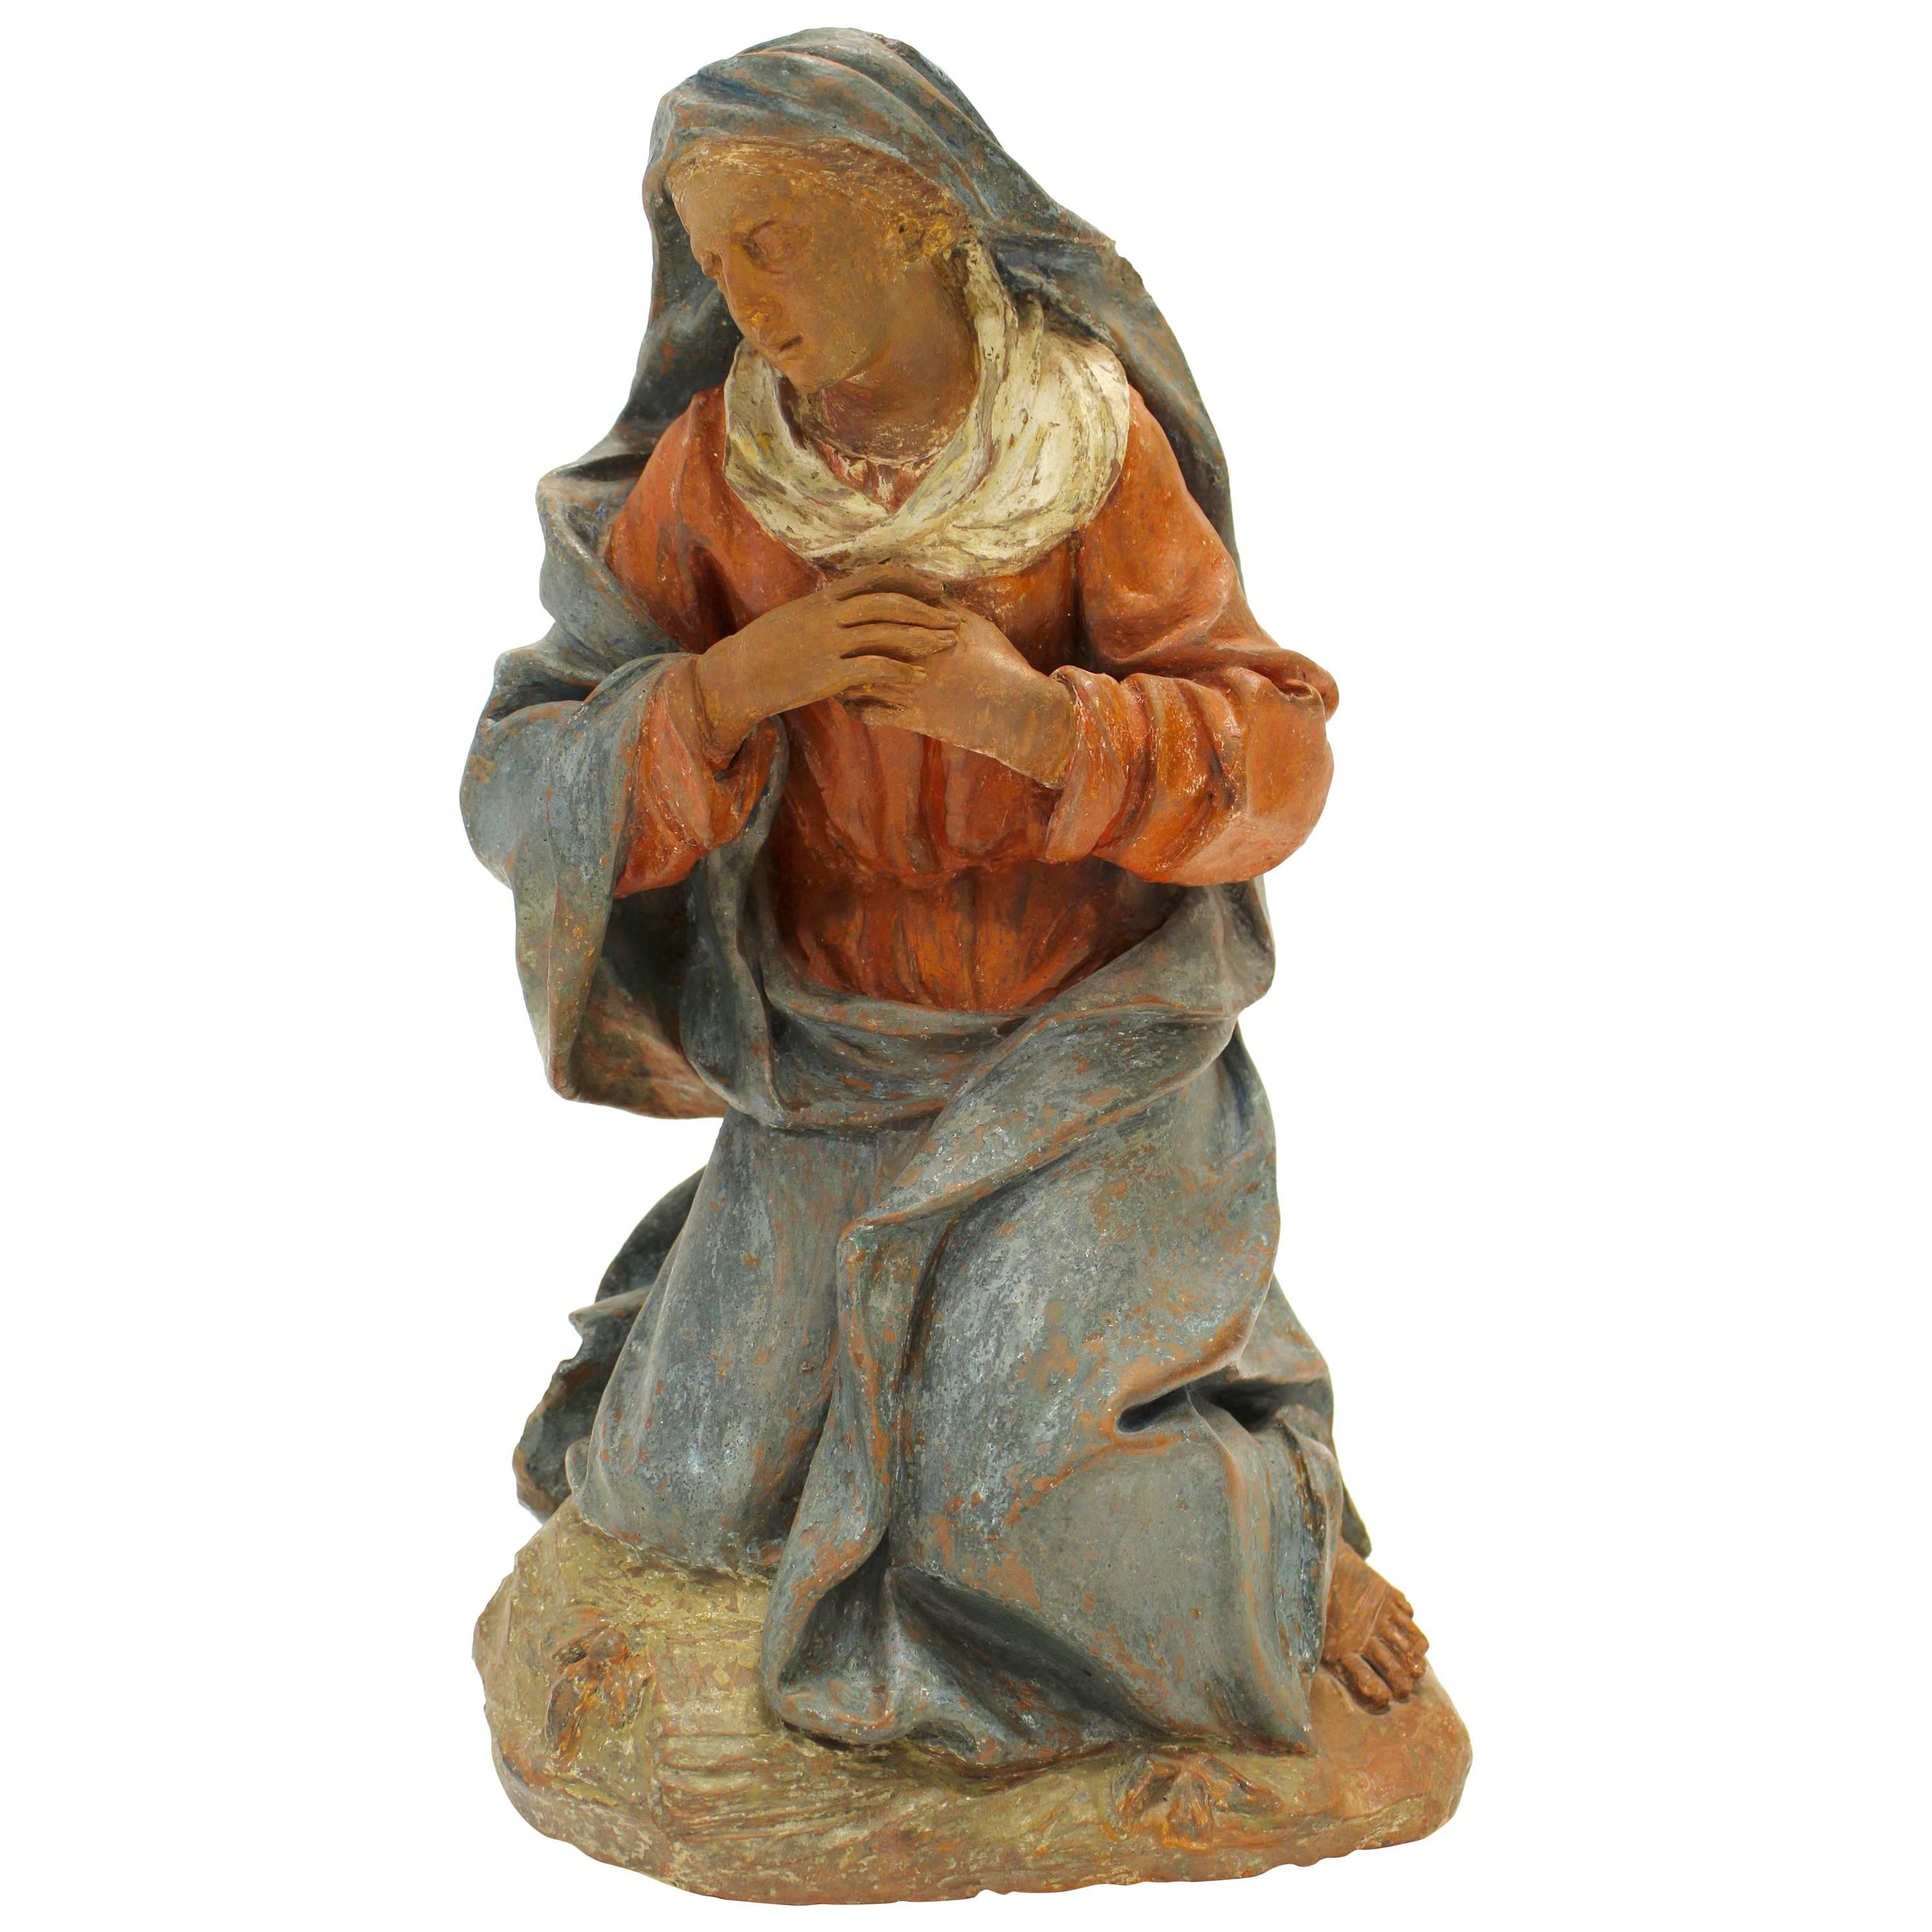 18th Century Continental Polychrome Terracotta Sculpture of the Kneeling Virgin